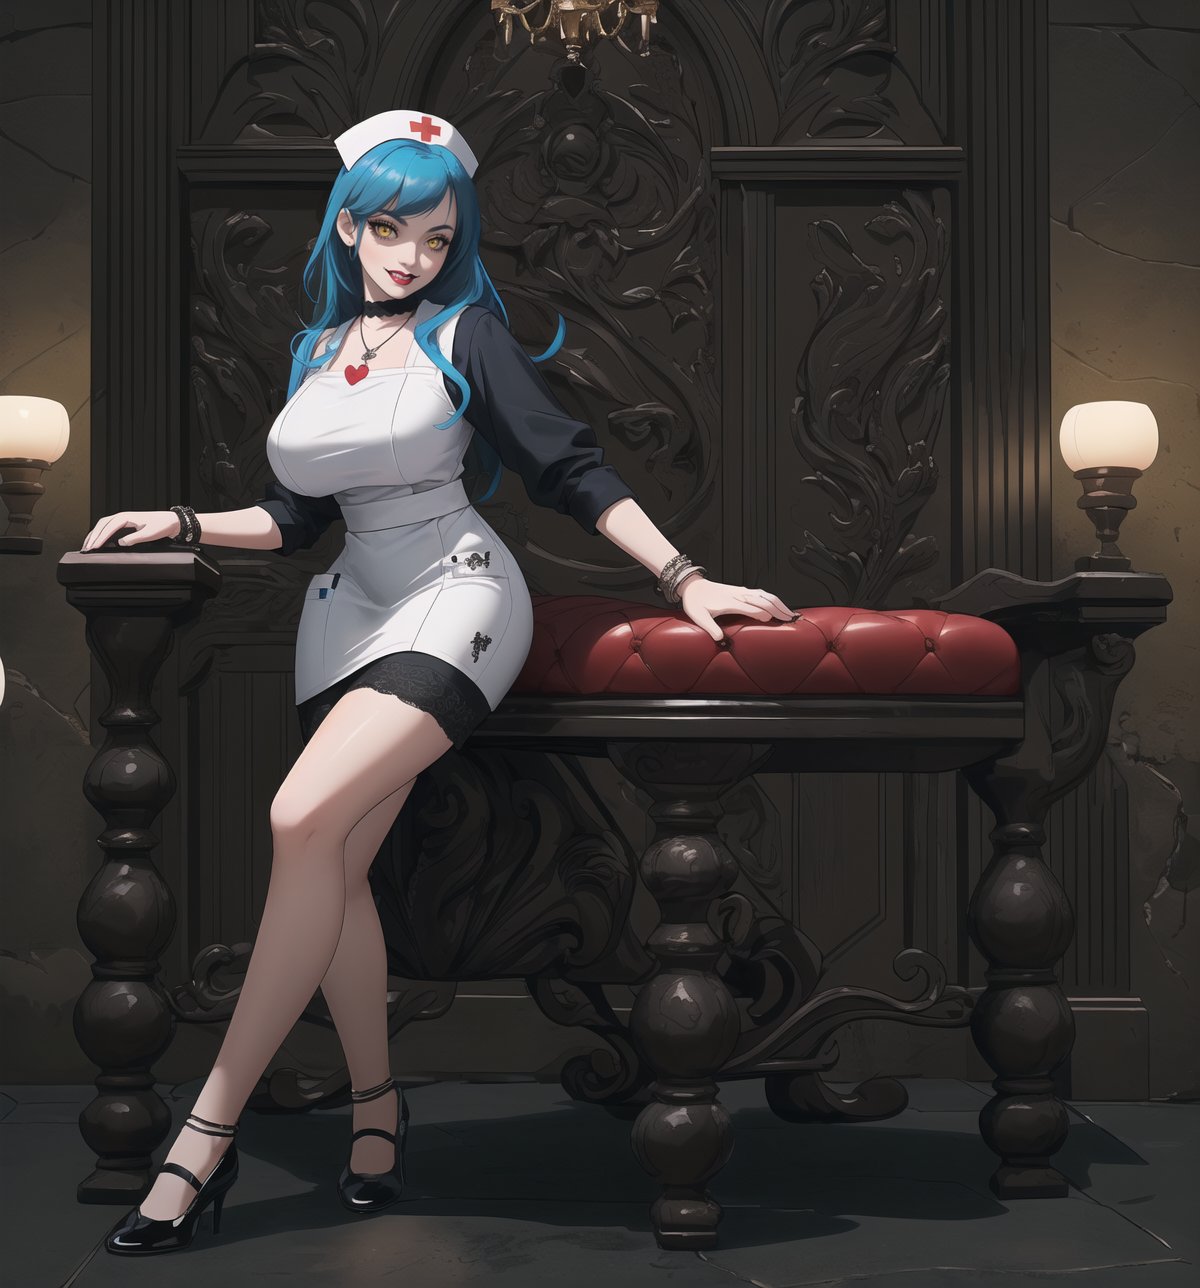 A nurse-gothic masterpiece with realistic details, rendered in ultra-high resolution. | A young woman, with blue hair and yellow eyes, is dressed in a nurse's outfit. The white dress with red details and the white apron with red details highlight her slender and careful figure. She also wears white socks, white low-heeled shoes, and accessories like a red heart pendant and a red leather bracelet, which add a layer of sweetness and affection to her appearance. ((The young woman smiles at the viewer, showing her white teeth and wearing black lipstick)), creating a charming contrast to her goth, nurse appearance. | The scene takes place in a macabre basement, lit by candles scattered throughout the room. The concrete, rock, wooden and metal structures create a spooky and mysterious atmosphere. The young woman stands out amidst this dark backdrop, adding a layer of beauty and fascination to the image. | Soft, moody lighting effects create a gothic mood, while detailed textures on clothing, accessories and set elements add realism to the masterpiece. | An intriguing and compelling scene of a young gothic nurse in a macabre basement, exploring themes of care, mystery, horror and beauty. | (((((The image reveals a full-body shot as she assumes a sensual pose, engagingly leaning against a structure within the scene in an exciting manner. She takes on a sensual pose as she interacts, boldly leaning on a structure, leaning back in an exciting way.))))). | ((full-body shot)), ((perfect pose)), ((perfect fingers, better hands, perfect hands)), ((perfect legs, perfect feet)), ((huge breasts)), ((perfect design)), ((perfect composition)), ((very detailed scene, very detailed background, perfect layout, correct imperfections)), More Detail, Enhance,